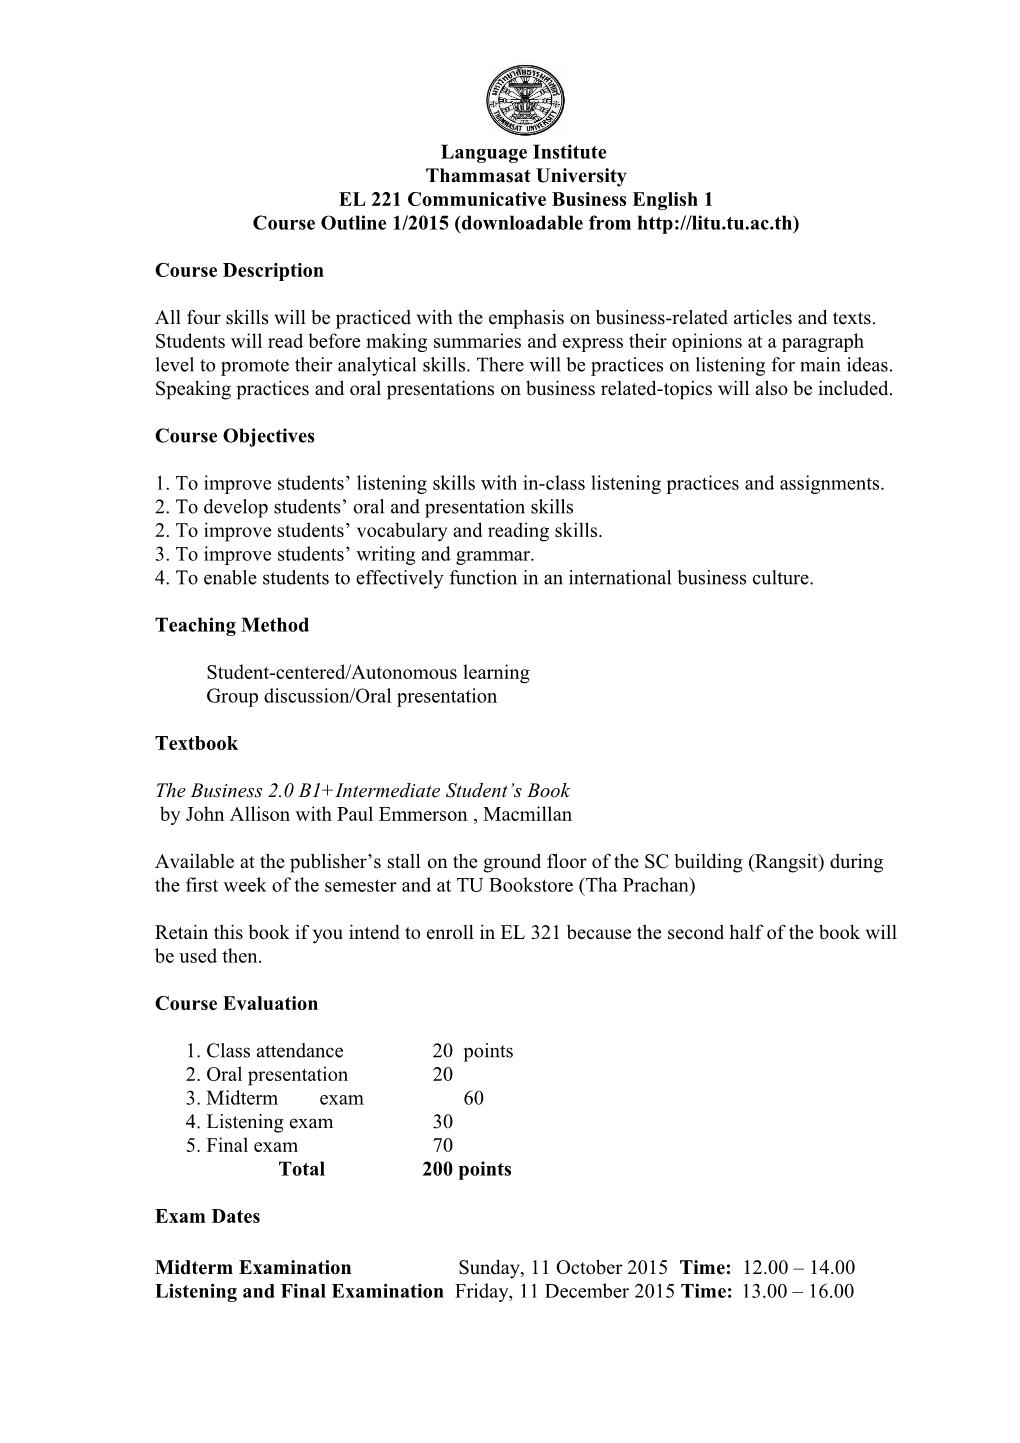 Course Outline 1/2015 (Downloadable From